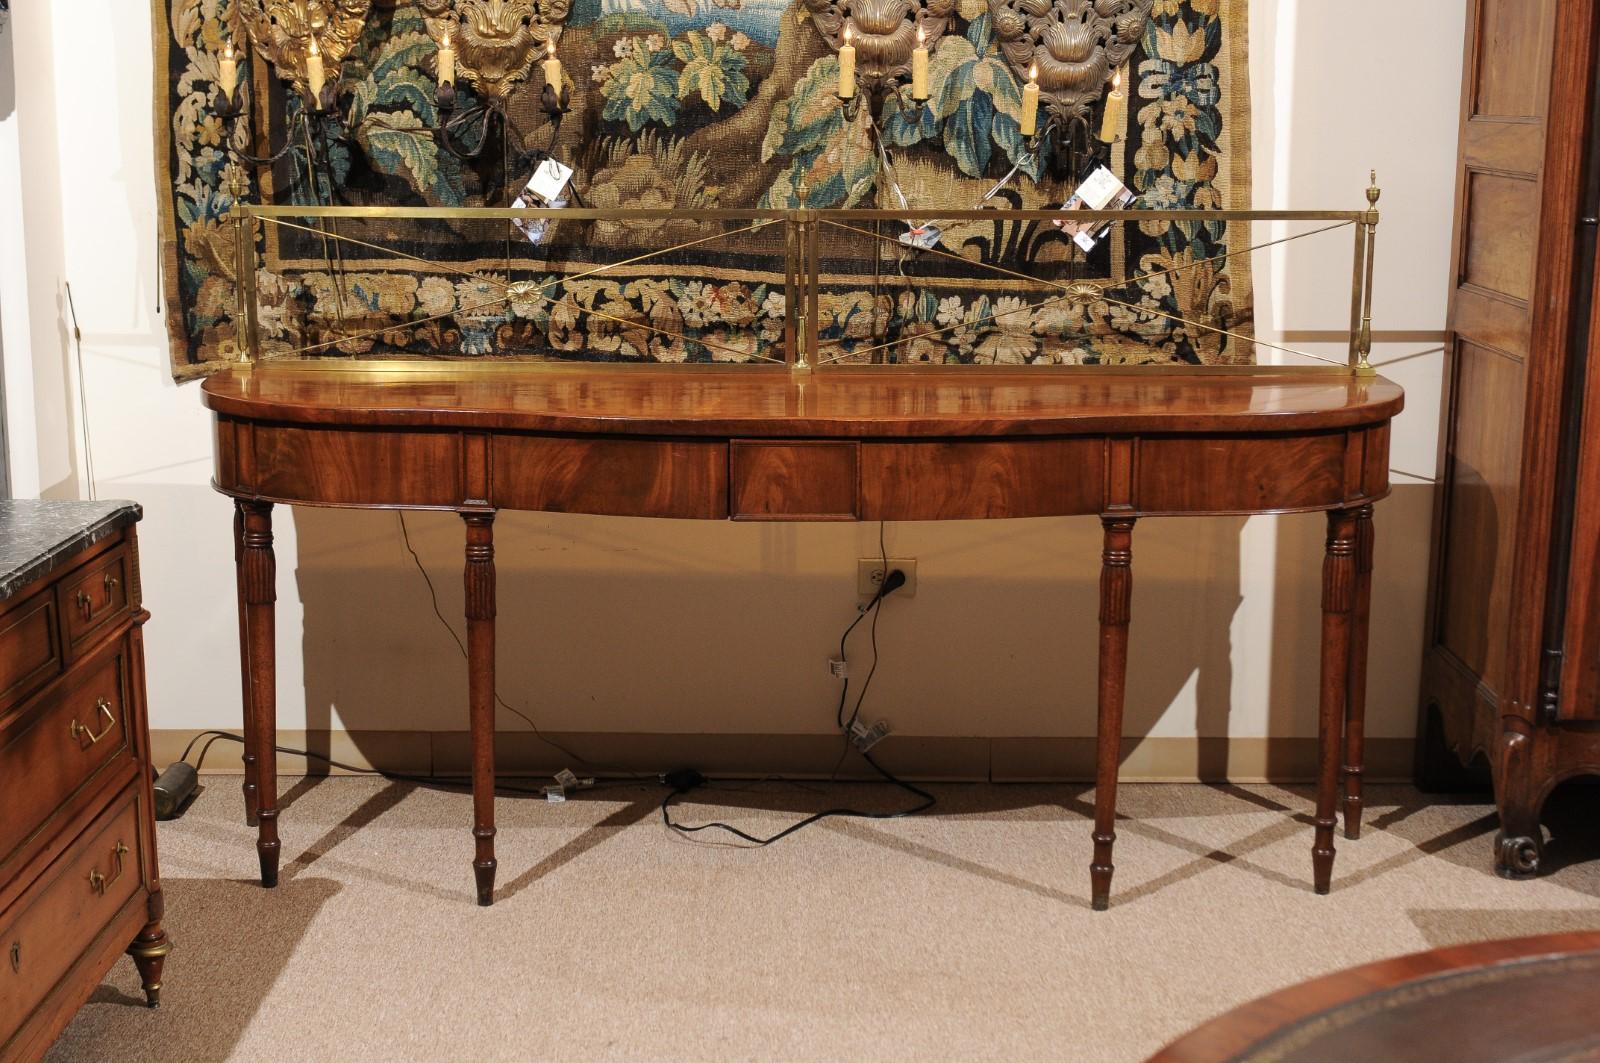 A long early 19th century English mahogany server with brass rail, serpentine front, 3 drawers in frieze and ending in turned tapered legs. 

 If you do not want the brass rail, we can remove.